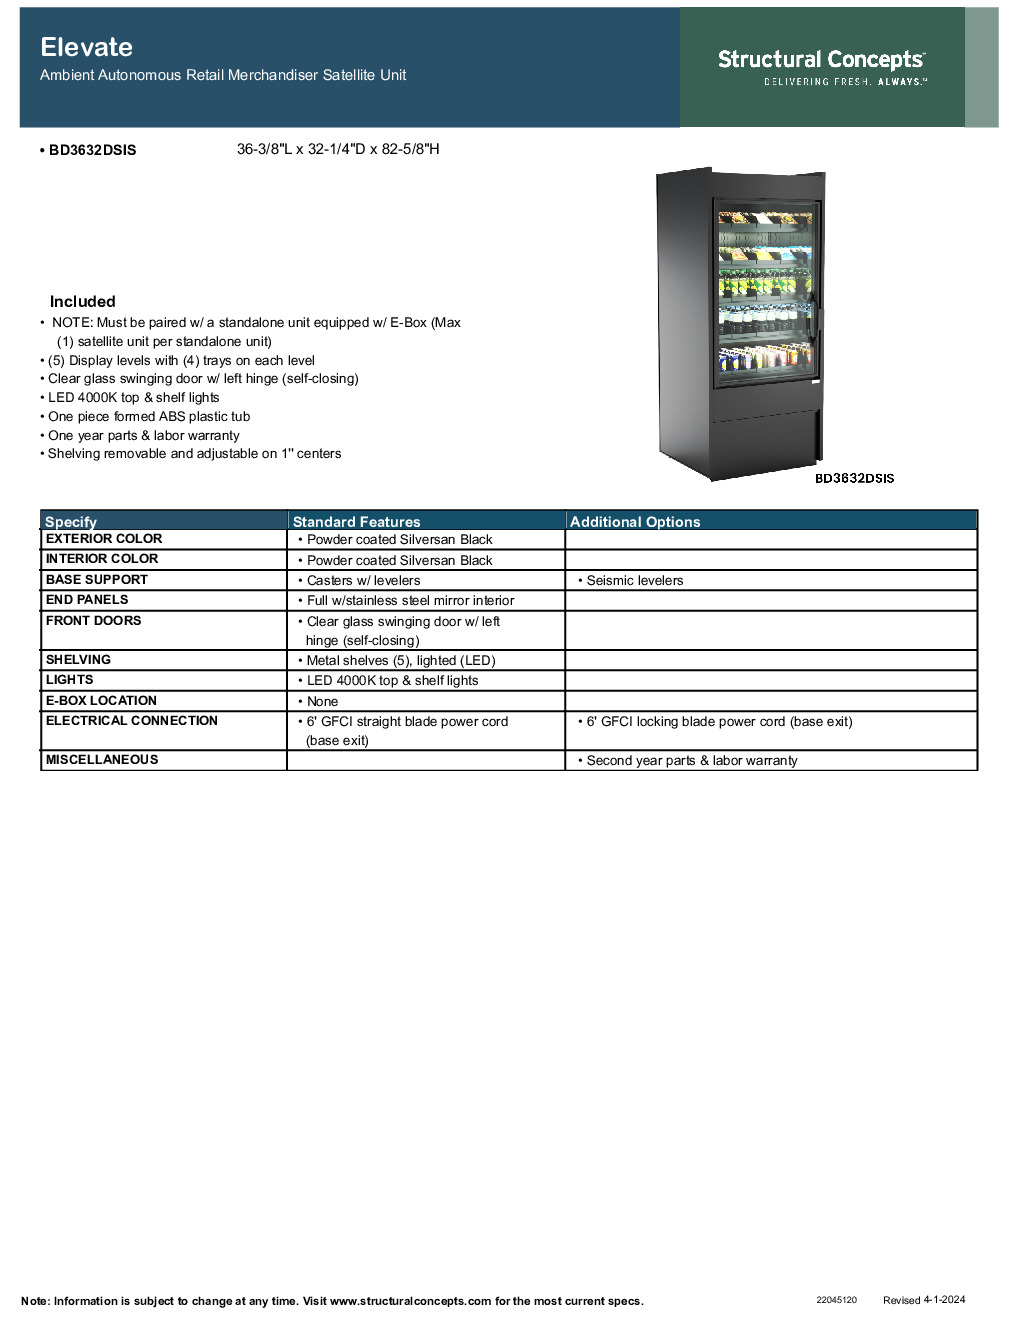 Structural Concepts BD3632DSIS Self-Serve Non-Refrigerated Display Case